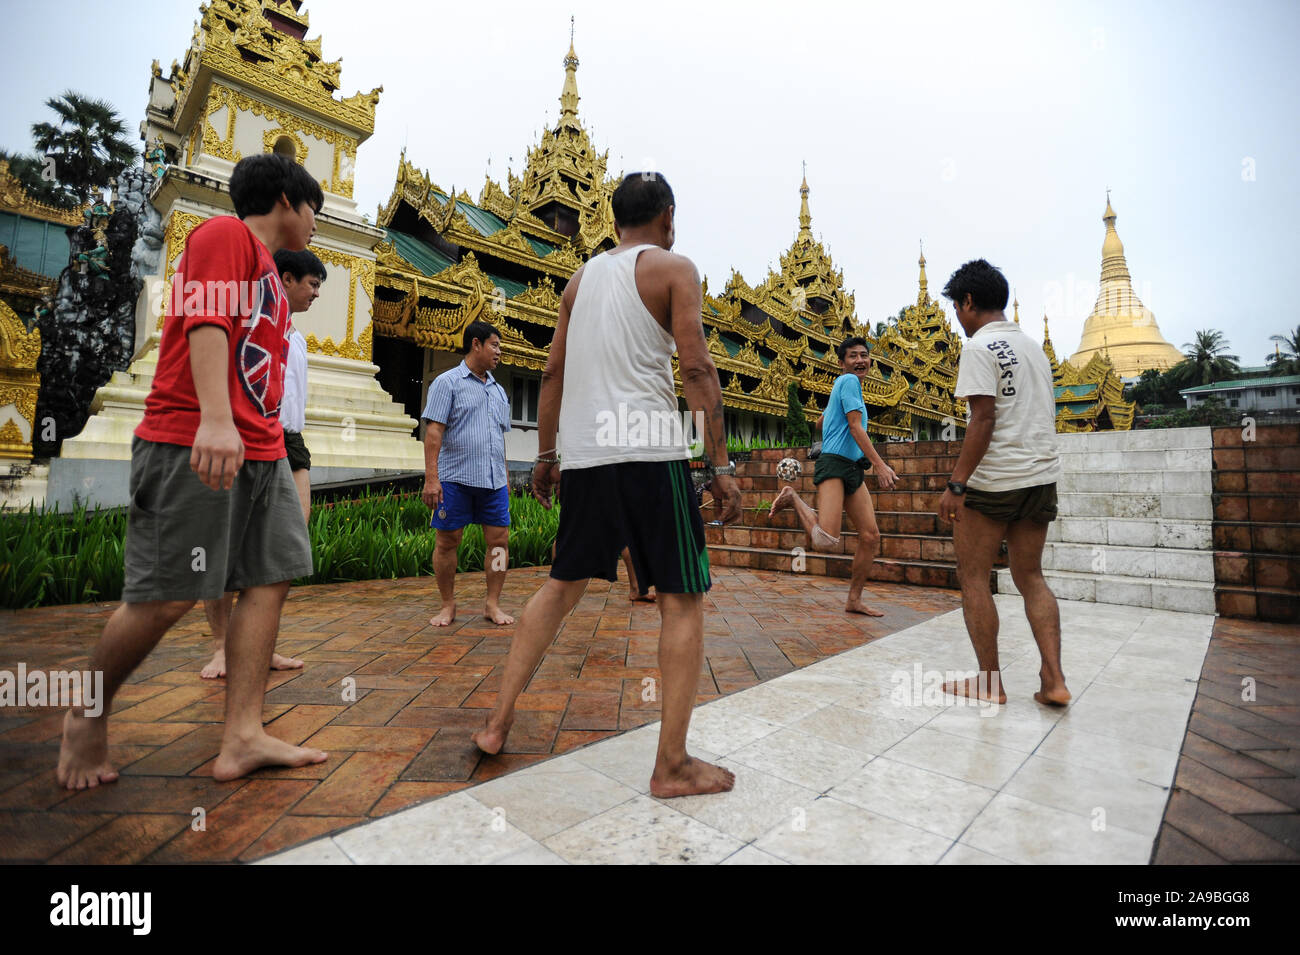 25.08.2013, Yangon, , Myanmar - A group of men plays in front of the temple area of the Shwedagon Pagoda Chinlone. The game is the national sport of t Stock Photo